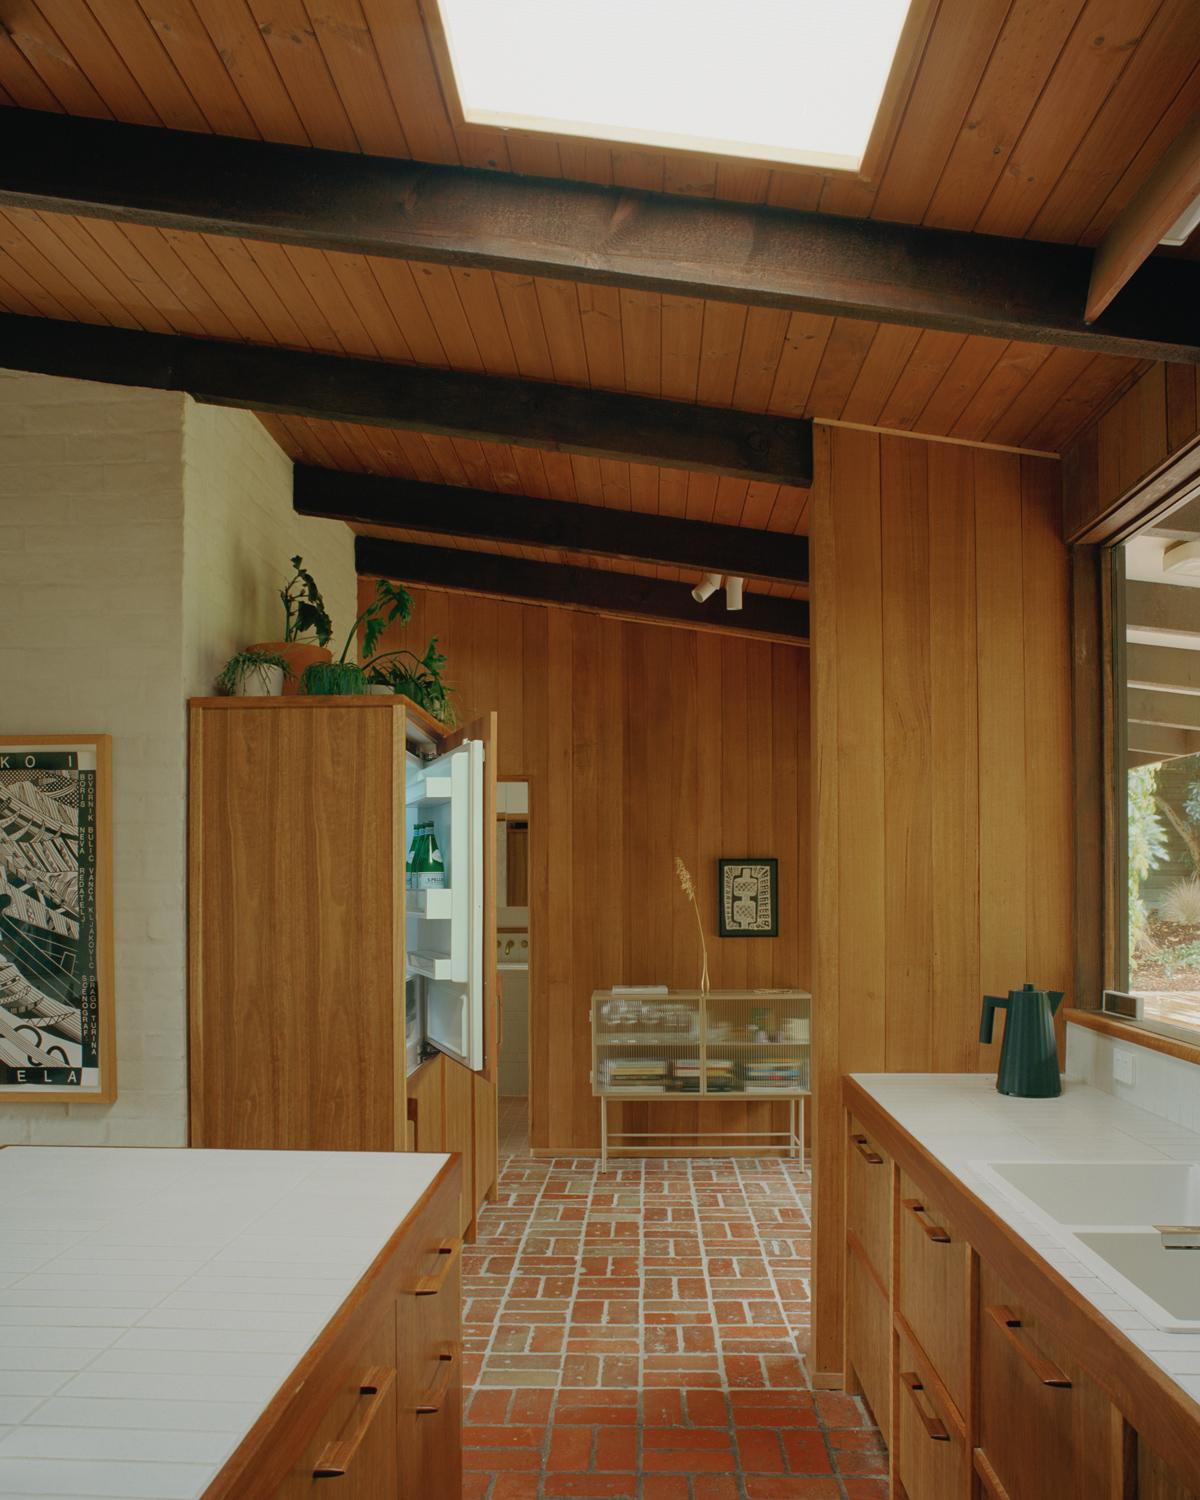 Alistair Knox's Mid-Century Home in Warrandyte renovated by Adriana Hanna